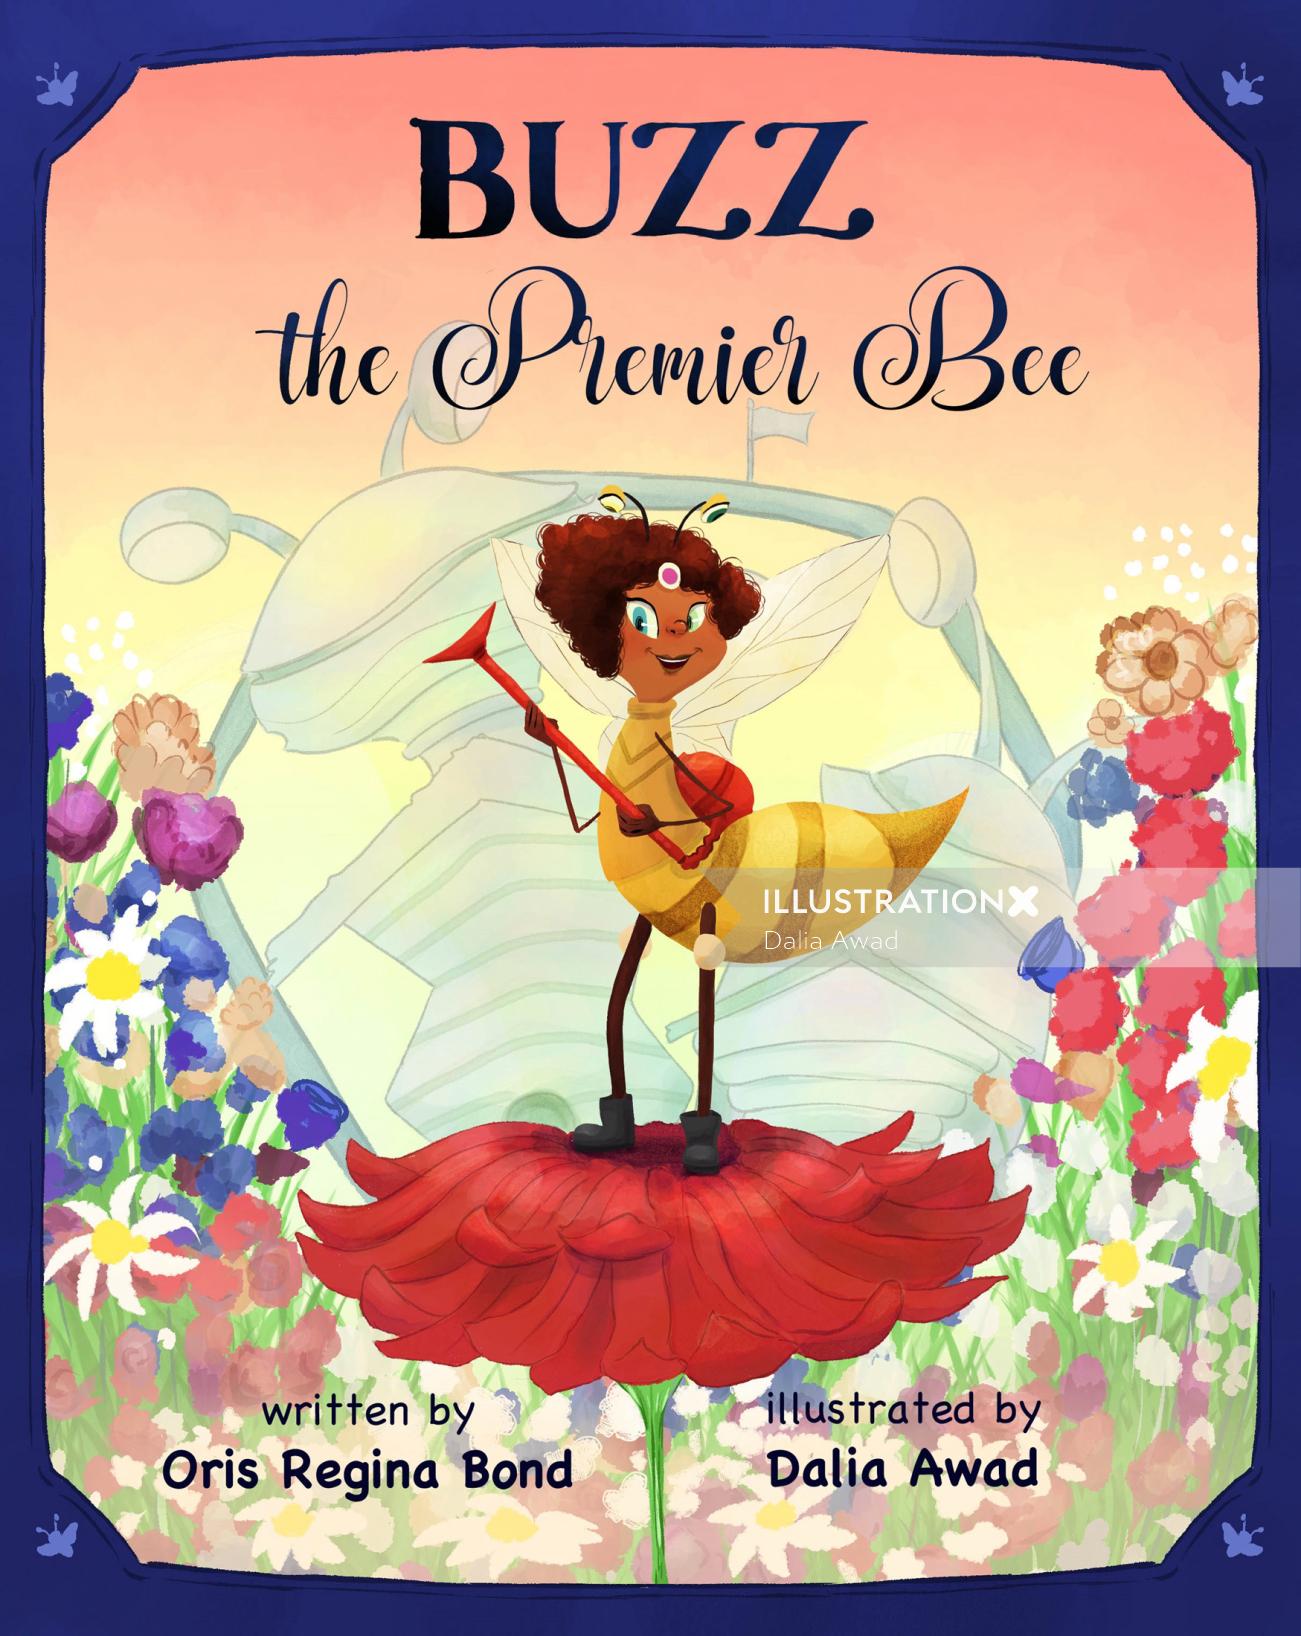 Cover illustration of Buzz: The Premier Bee by Dalia Awads